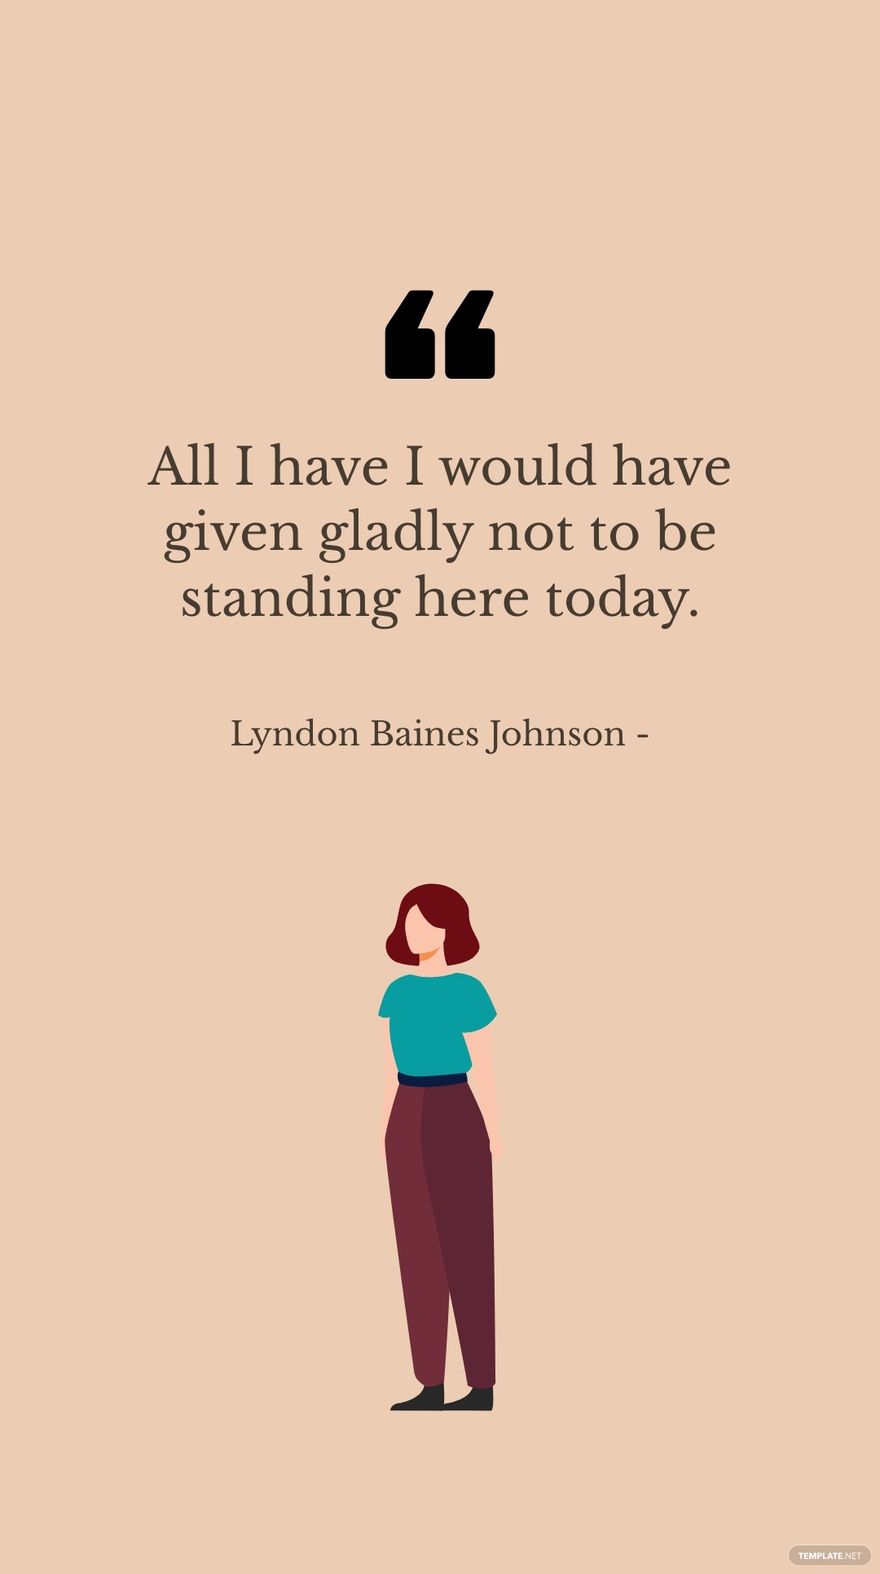 Lyndon Baines Johnson - All I have I would have given gladly not to be standing here today.